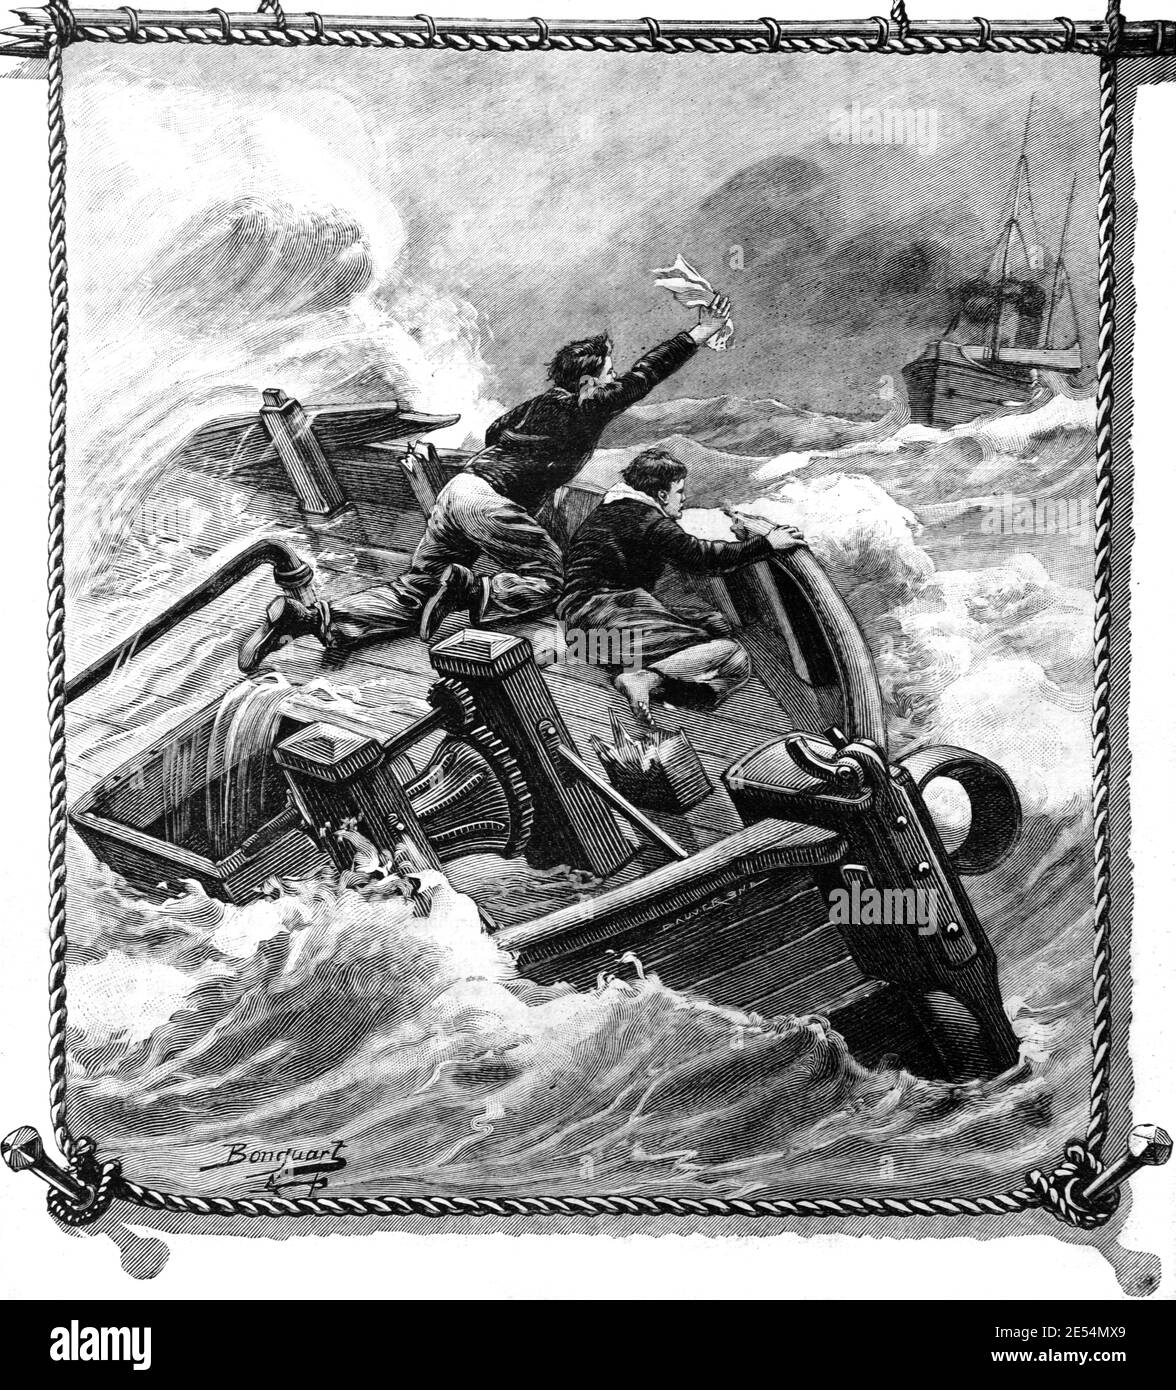 Shipwreck and Lifeboat Rescue English Channel off Coast at Le Havre France 1904 Vintage Illustration or Engraving Stock Photo